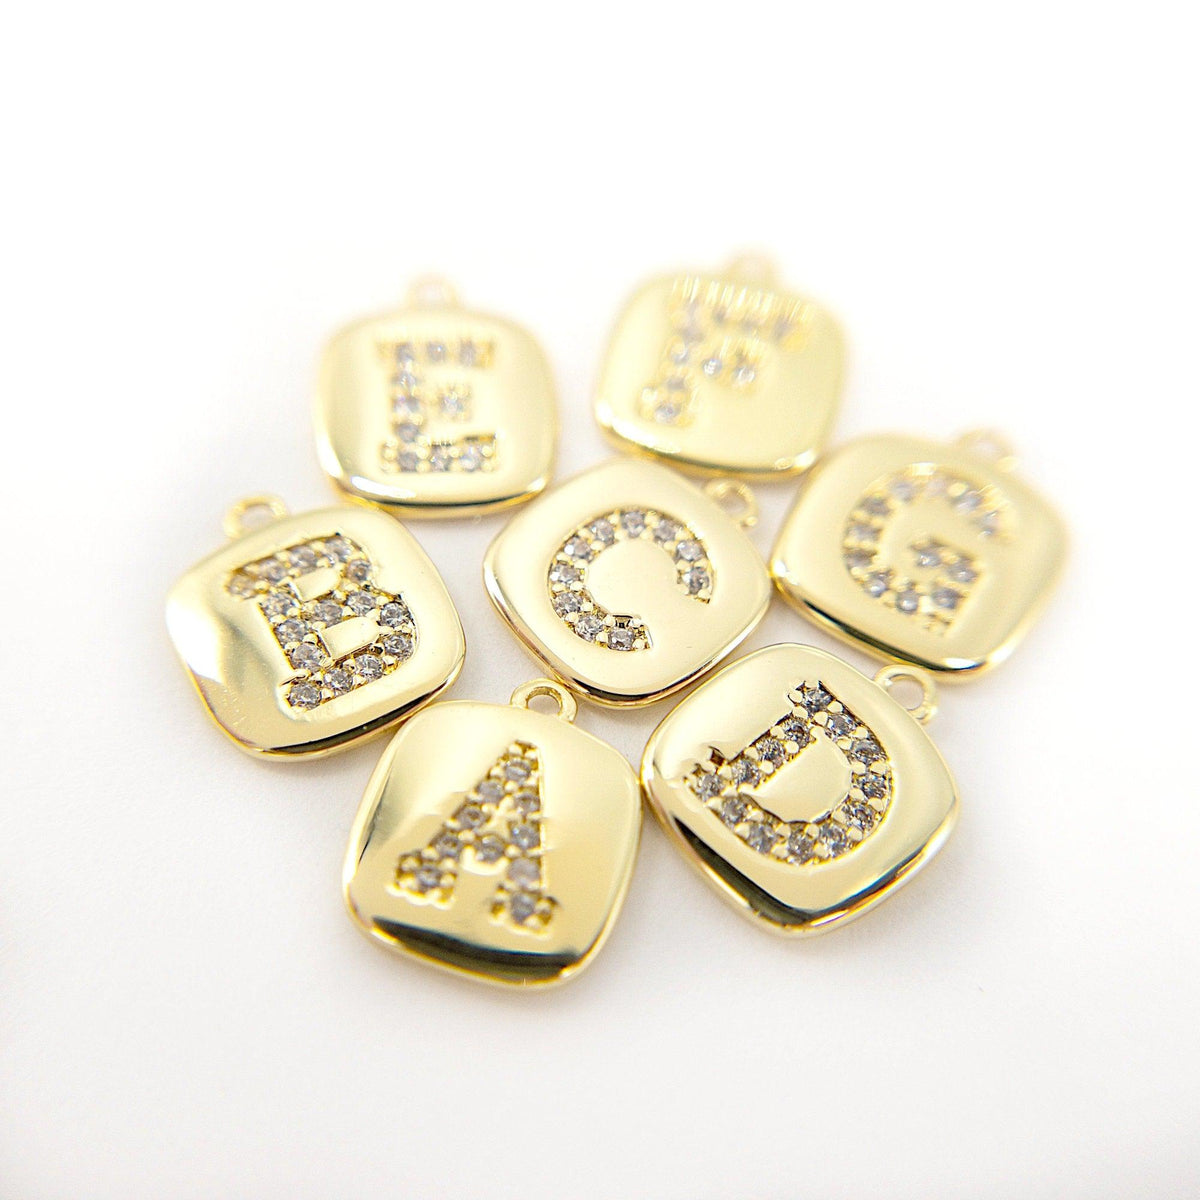 18K Gold Letter Charms, Letter Beads, Initial Charms, Bracelet Charms,mini Pendant  Charms for Necklace Alphabet Beads Charm 8x6mm7 